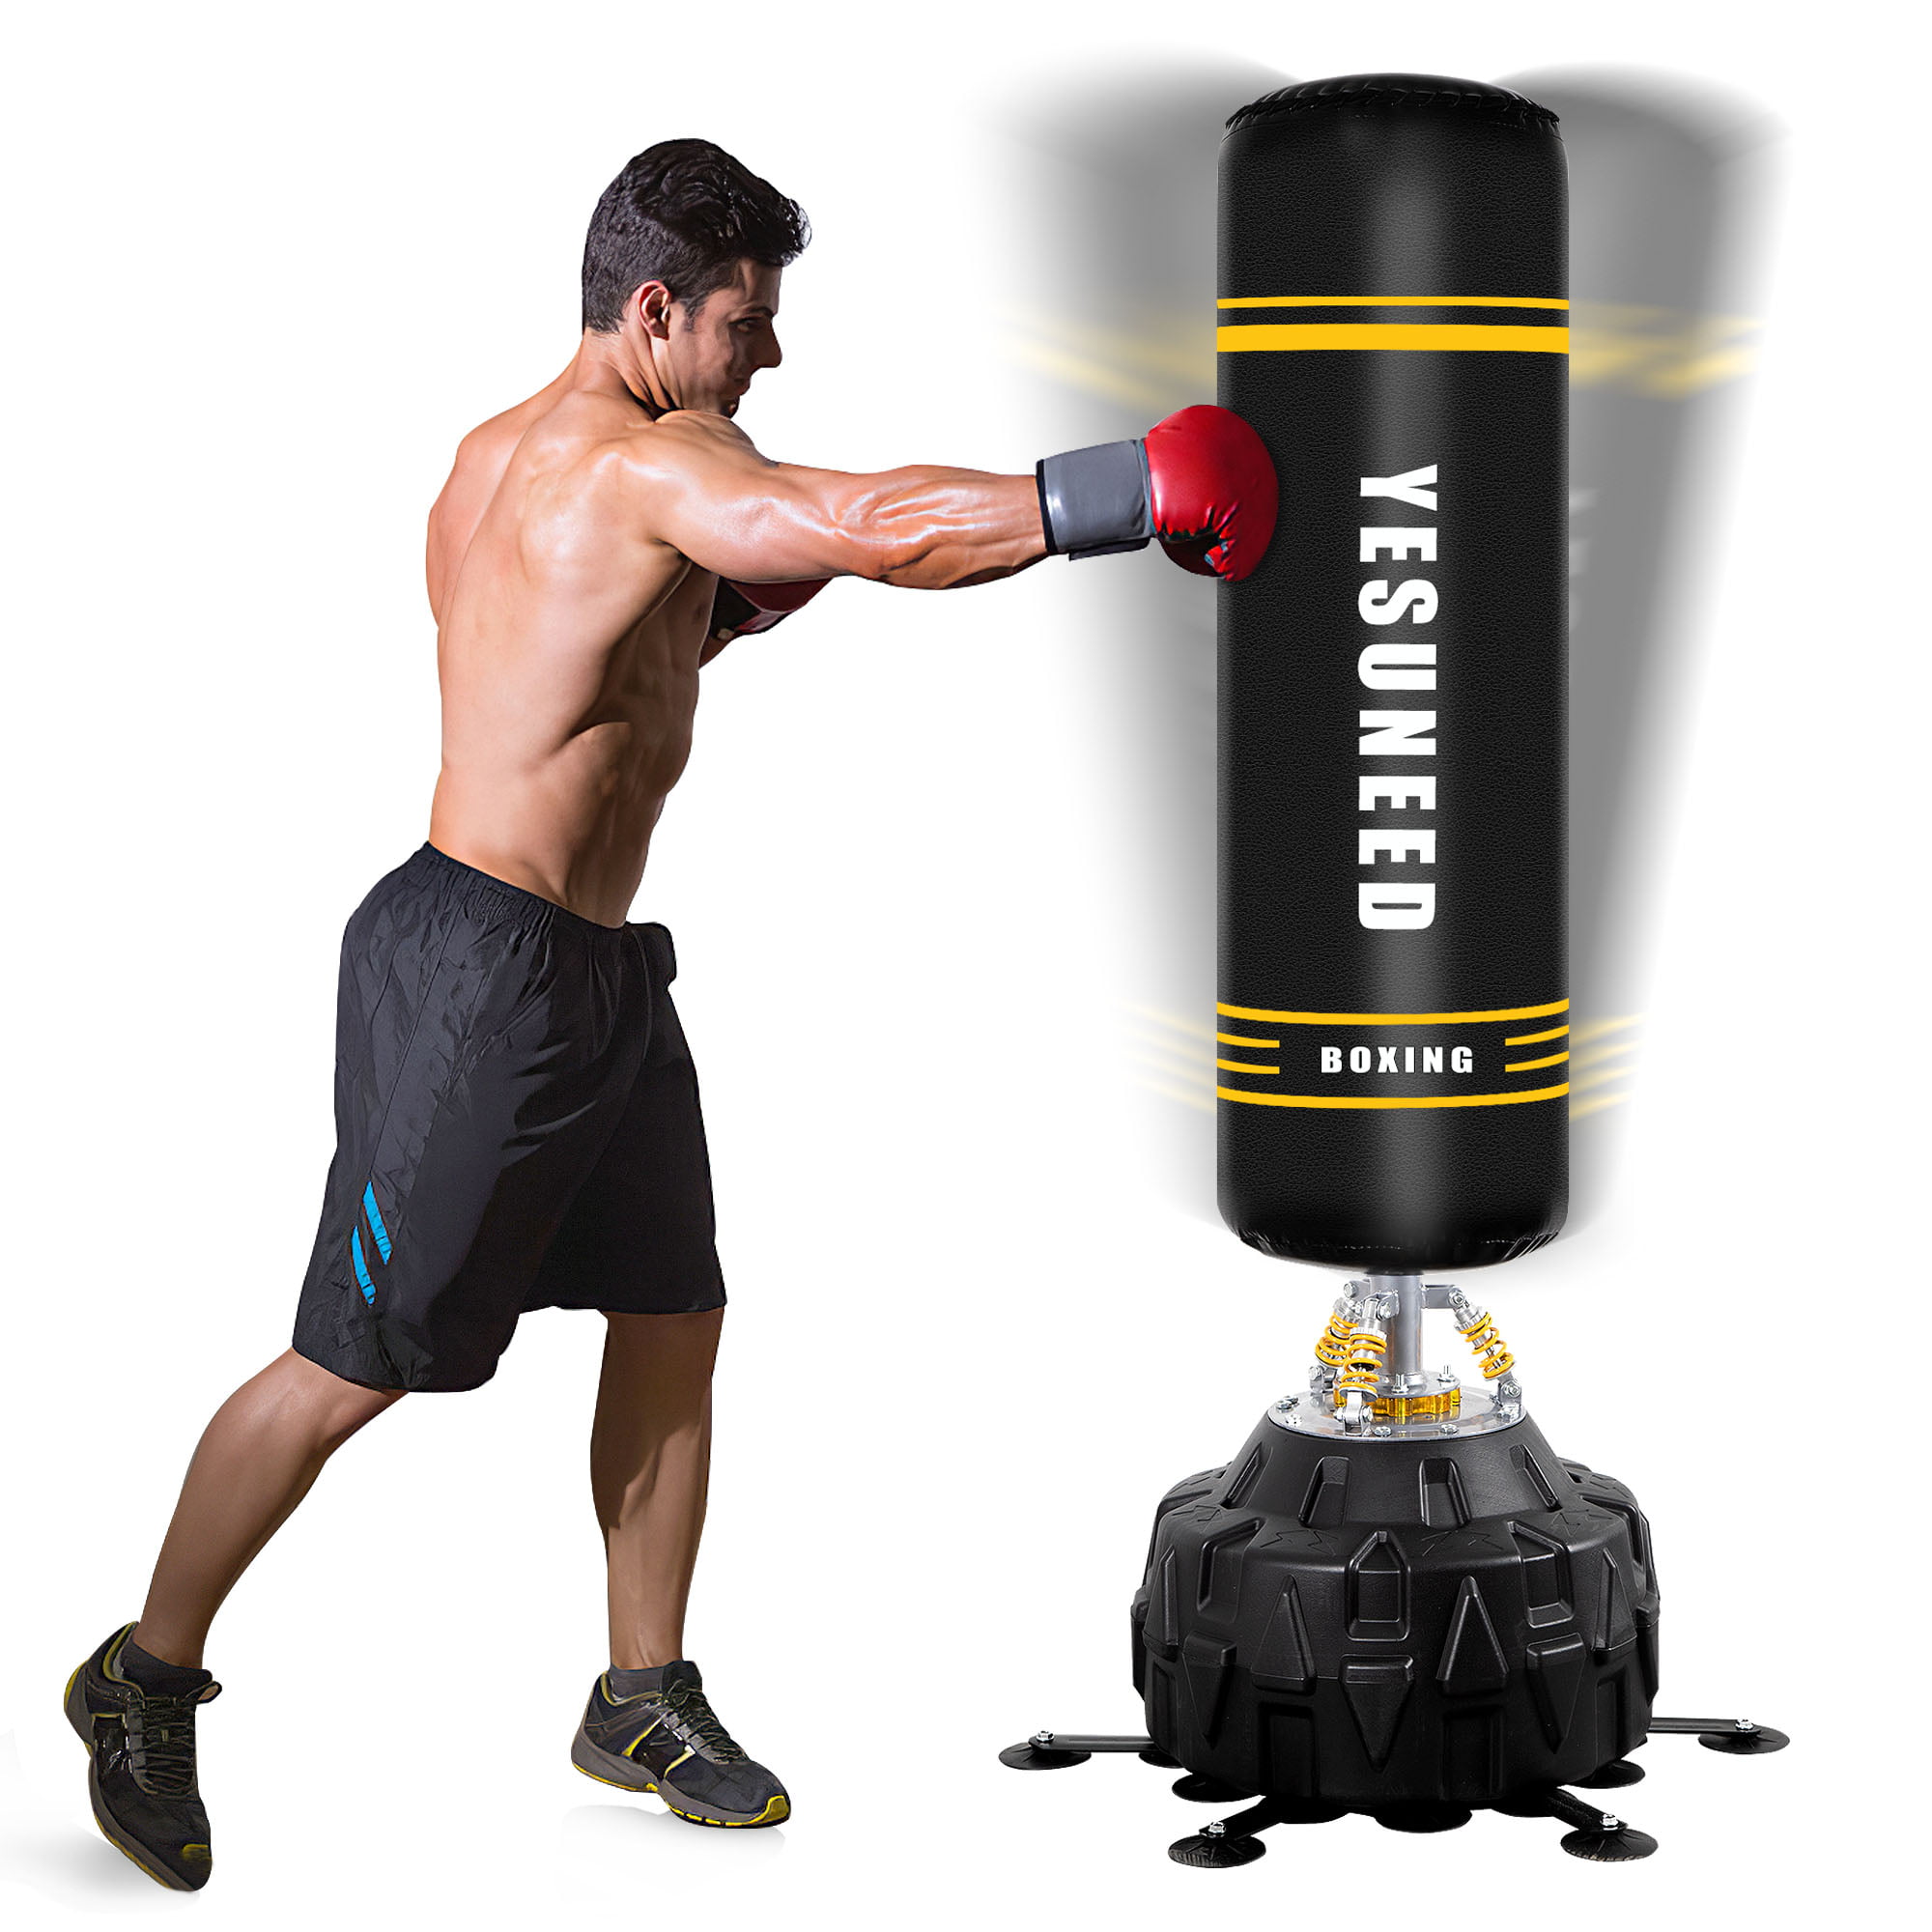 Details about   Boxing Punching Bag Set Free Standing Heavy Cardio Training MMA with Suction Cup 